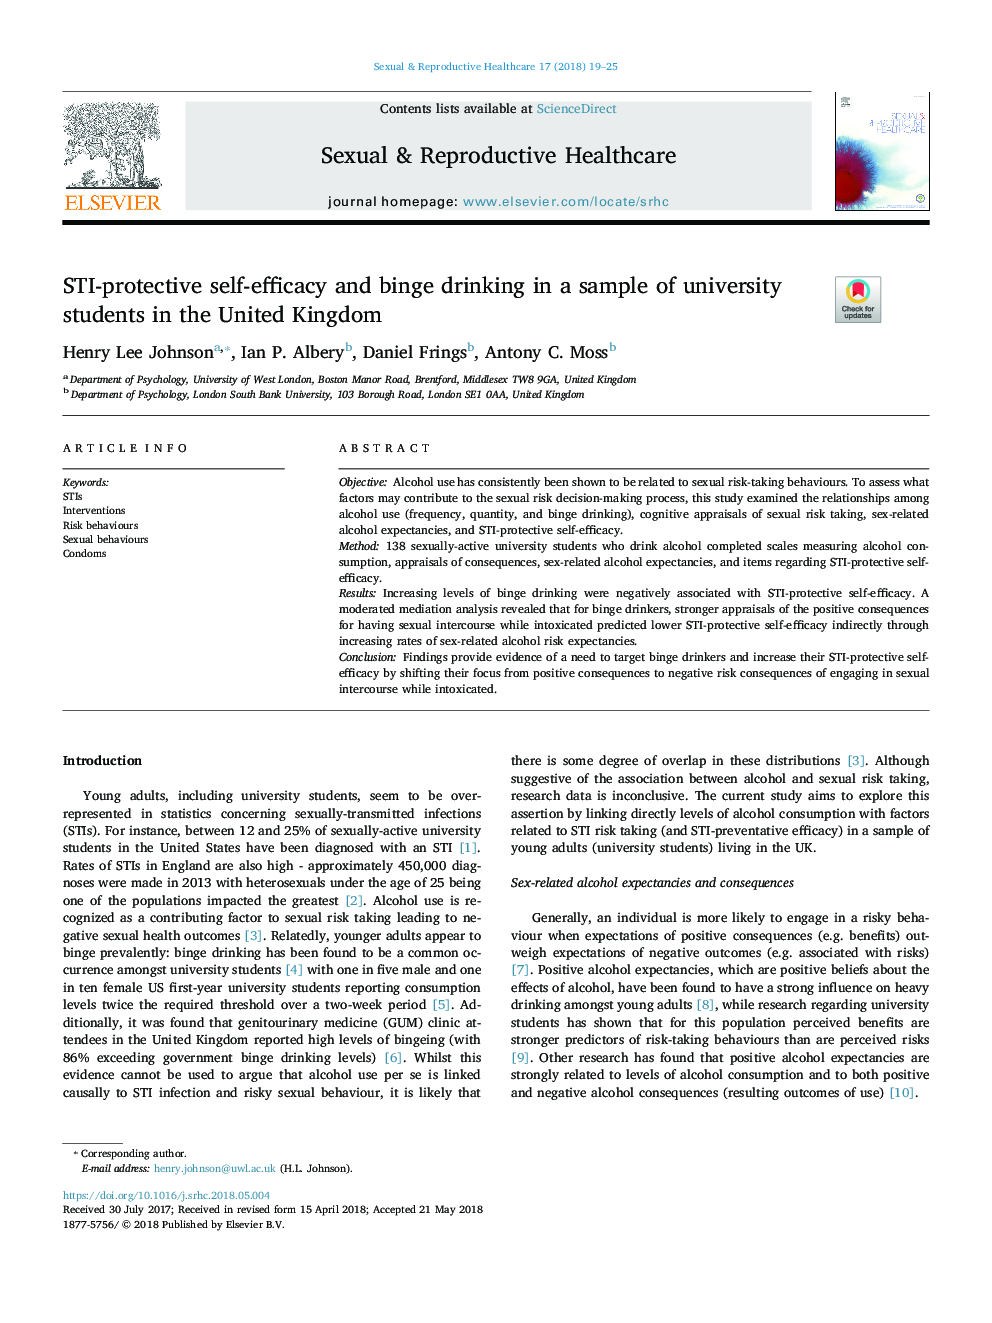 STI-protective self-efficacy and binge drinking in a sample of university students in the United Kingdom